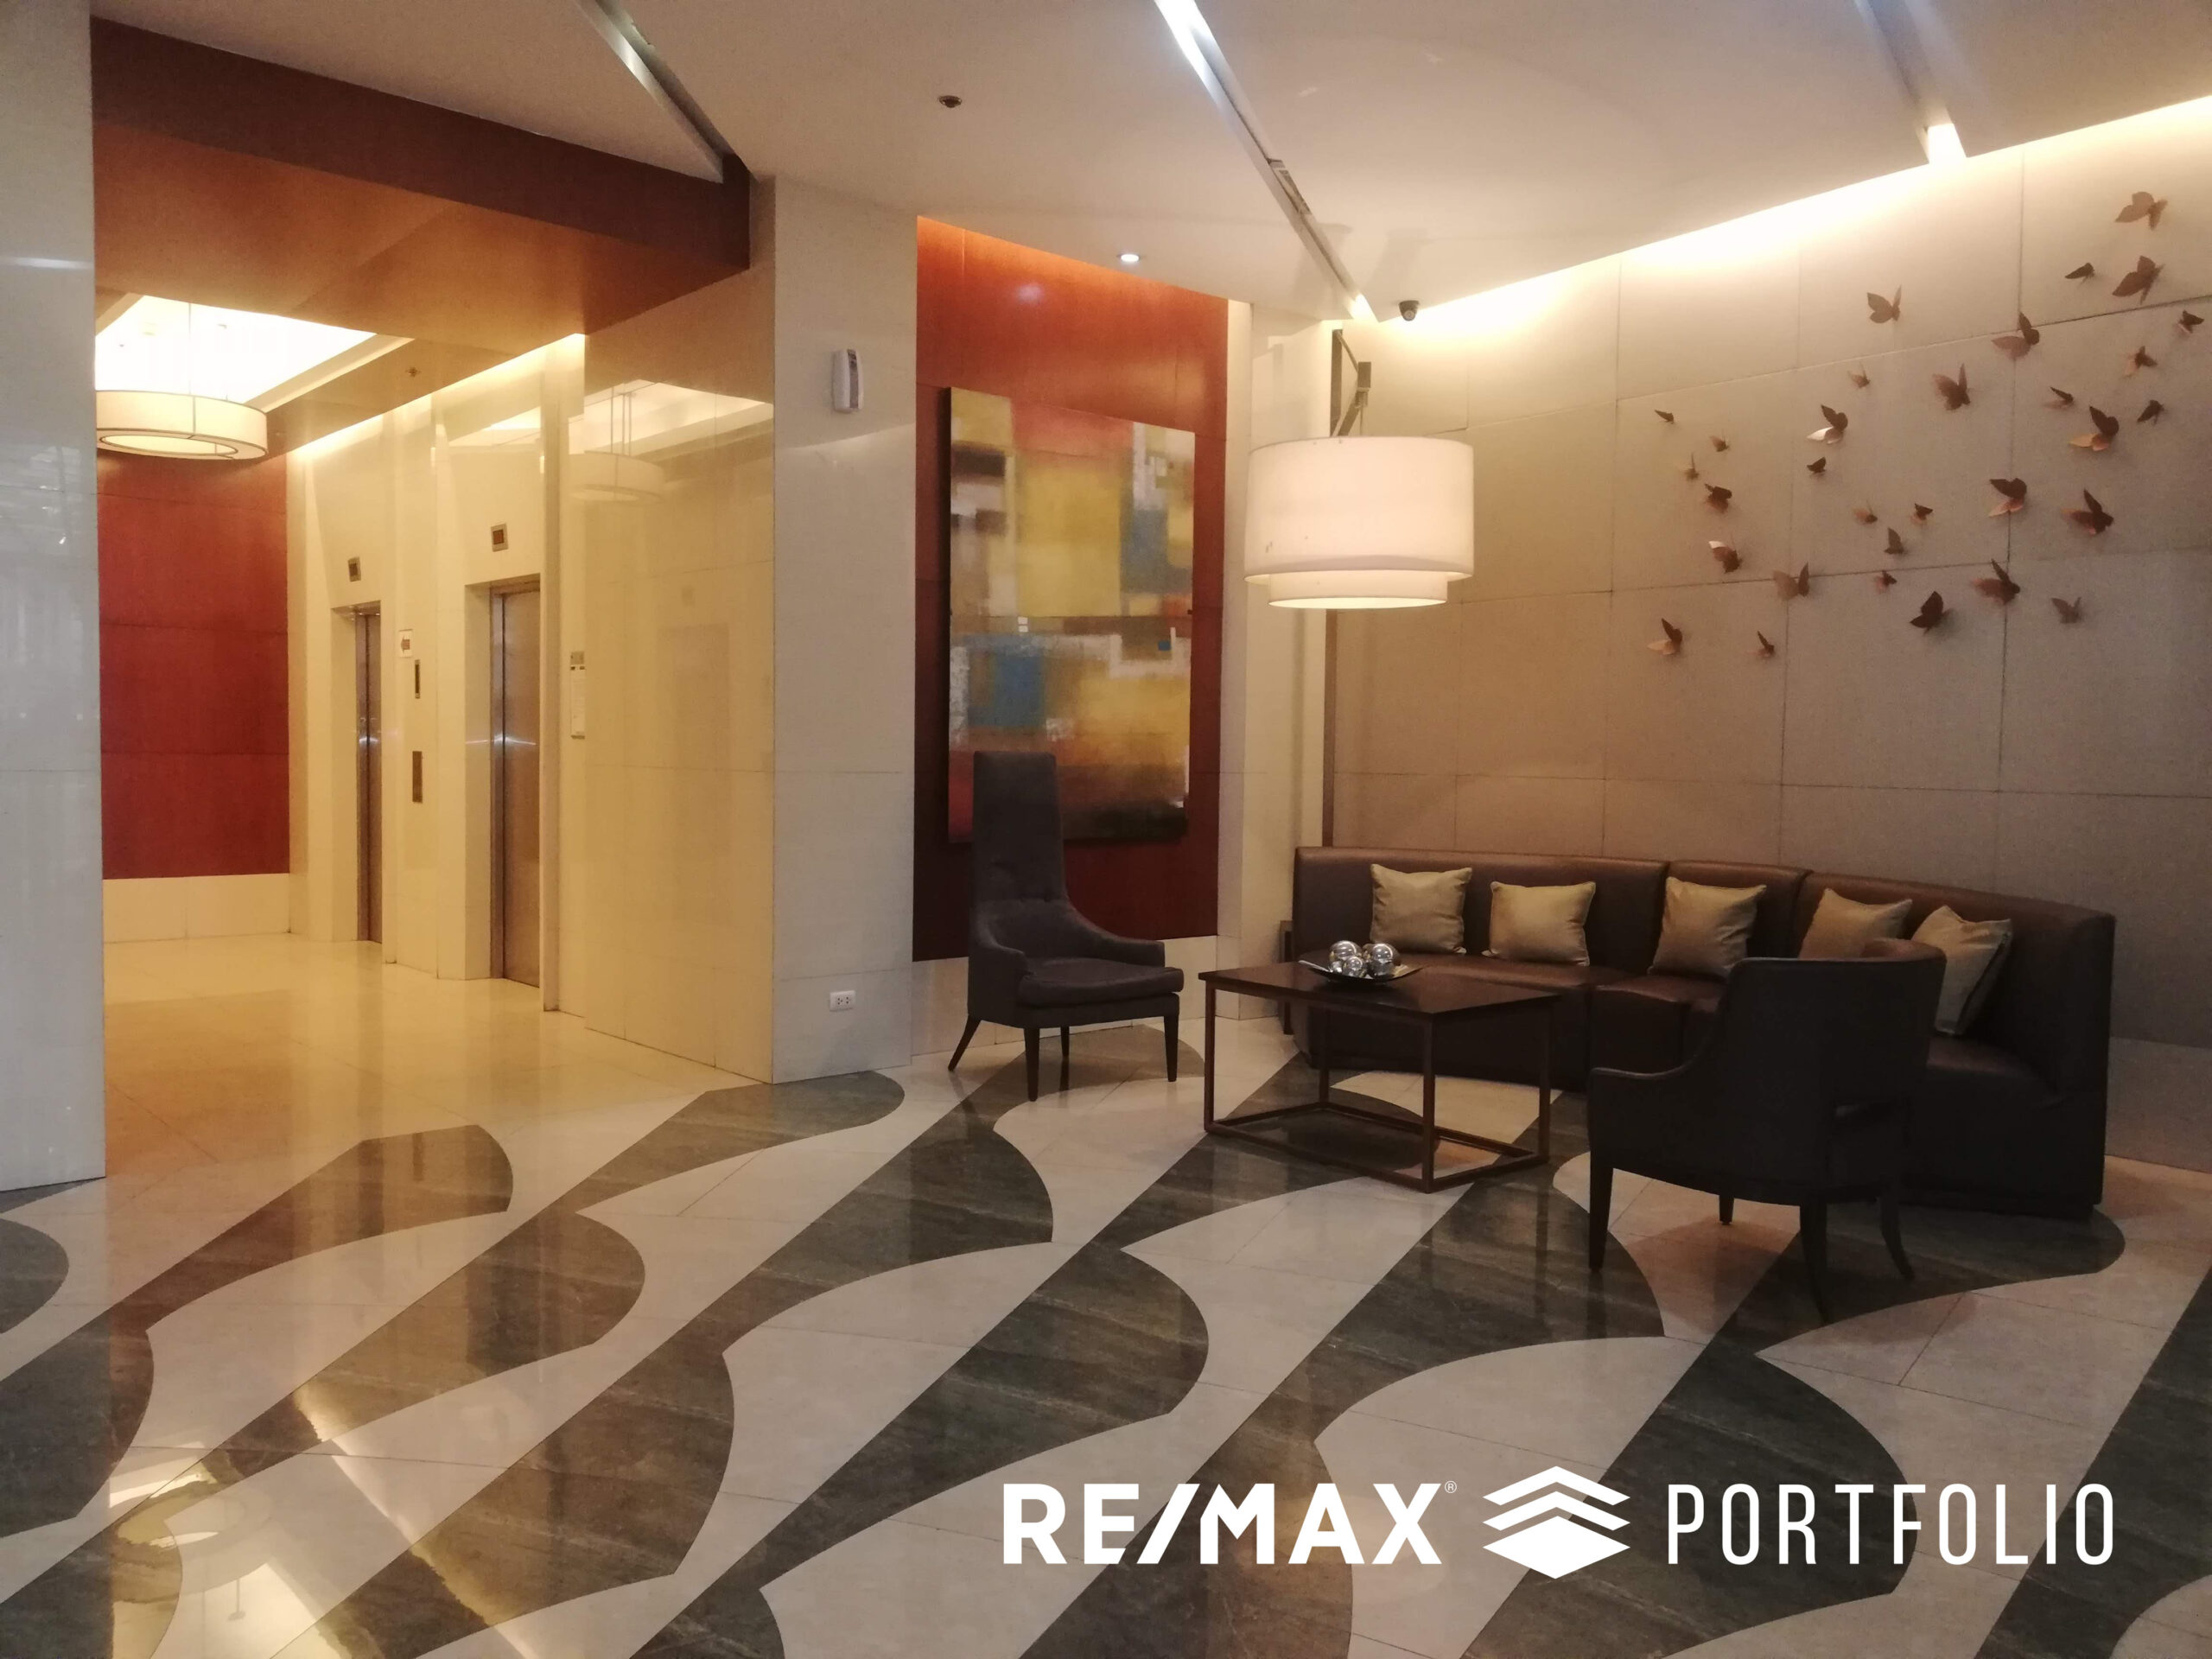 For Lease 1BR Loft Type in Emerald Lofts, Ortigas Center